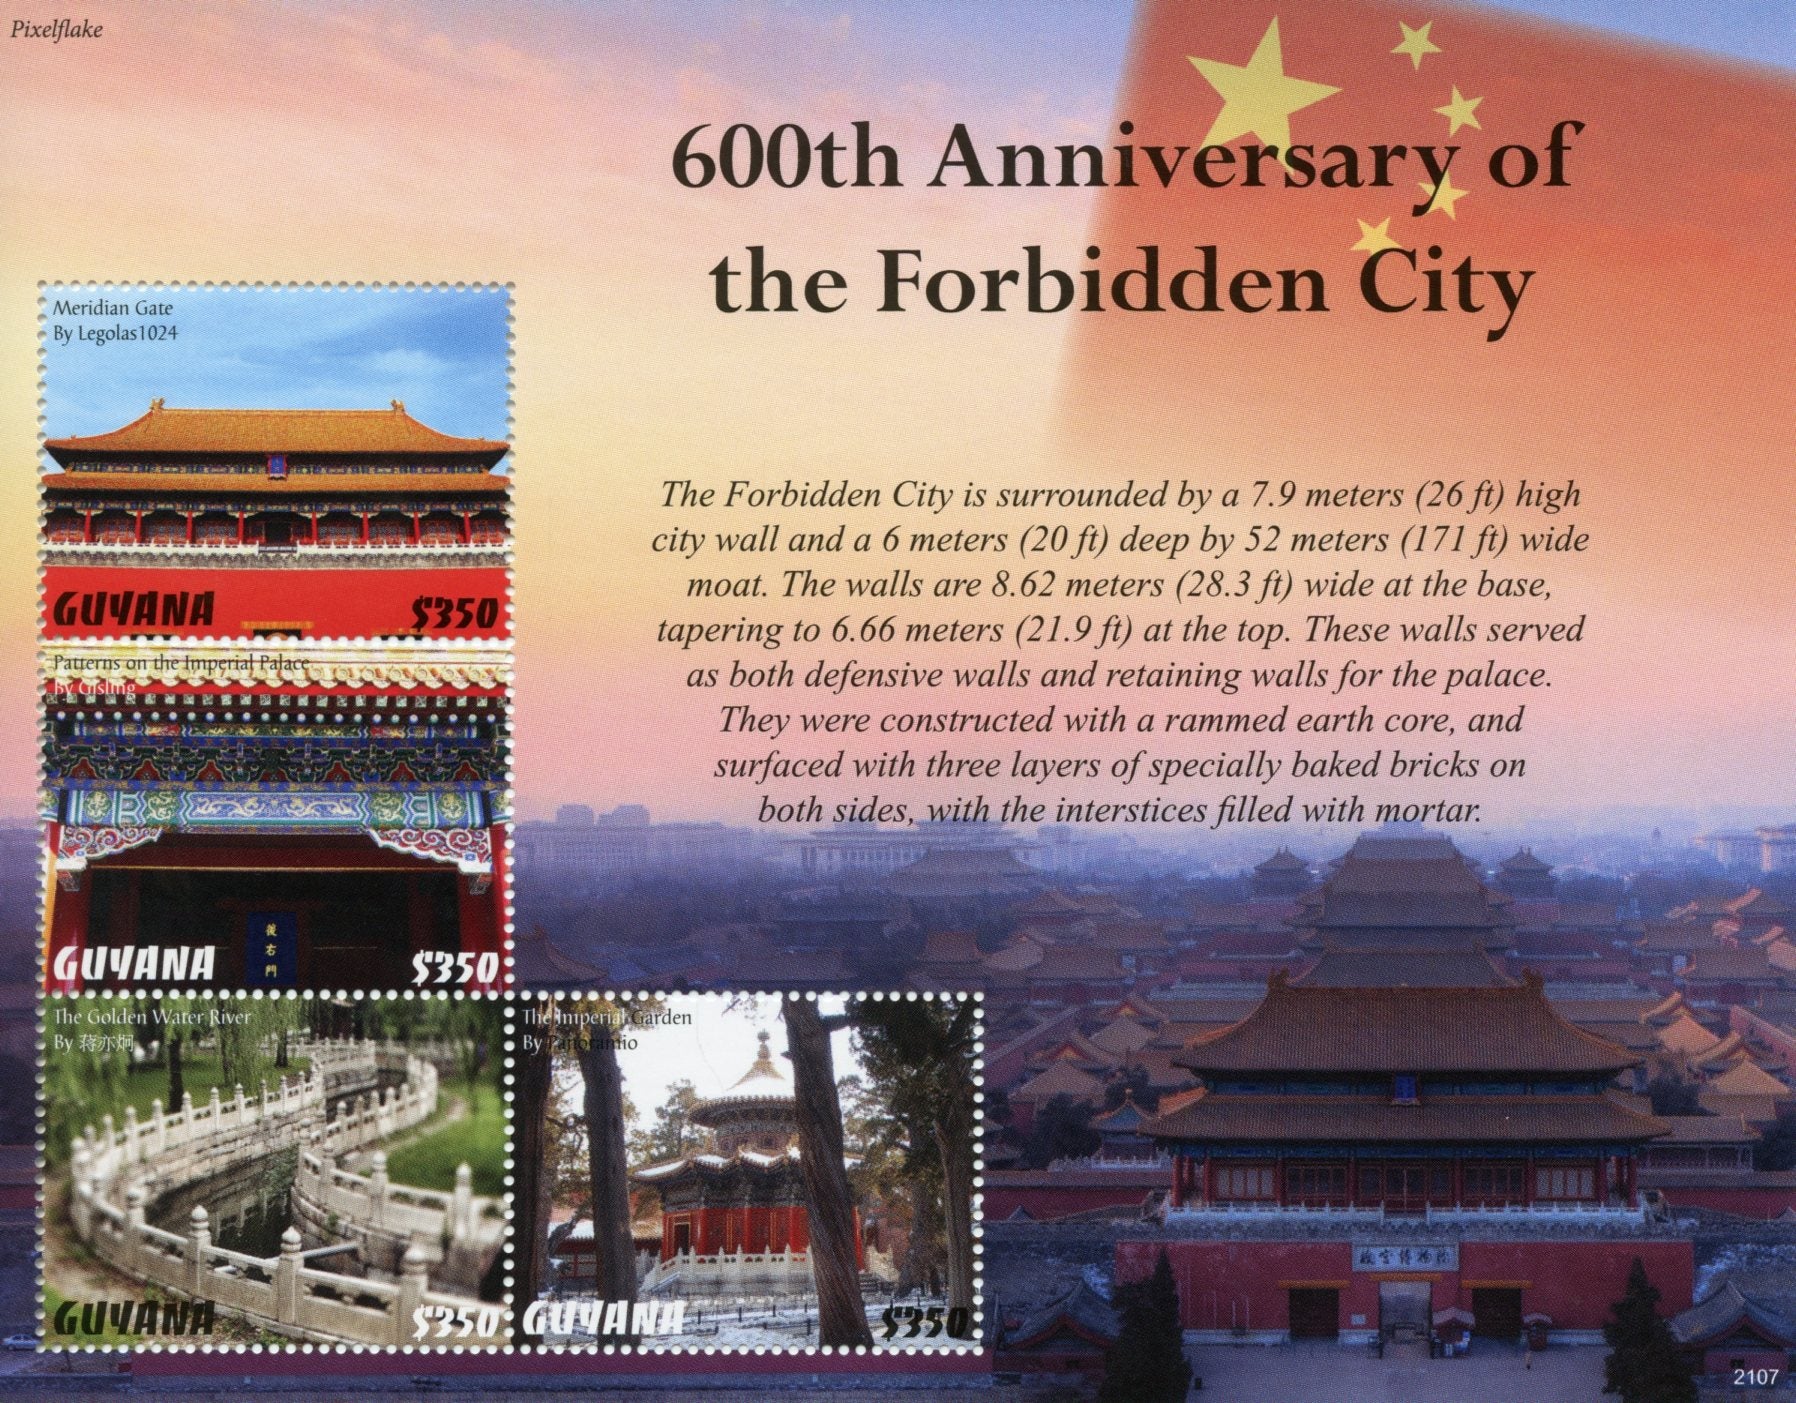 Guyana 2021 MNH Architecture Stamps Forbidden City 600th Imperial Palace 4v M/S